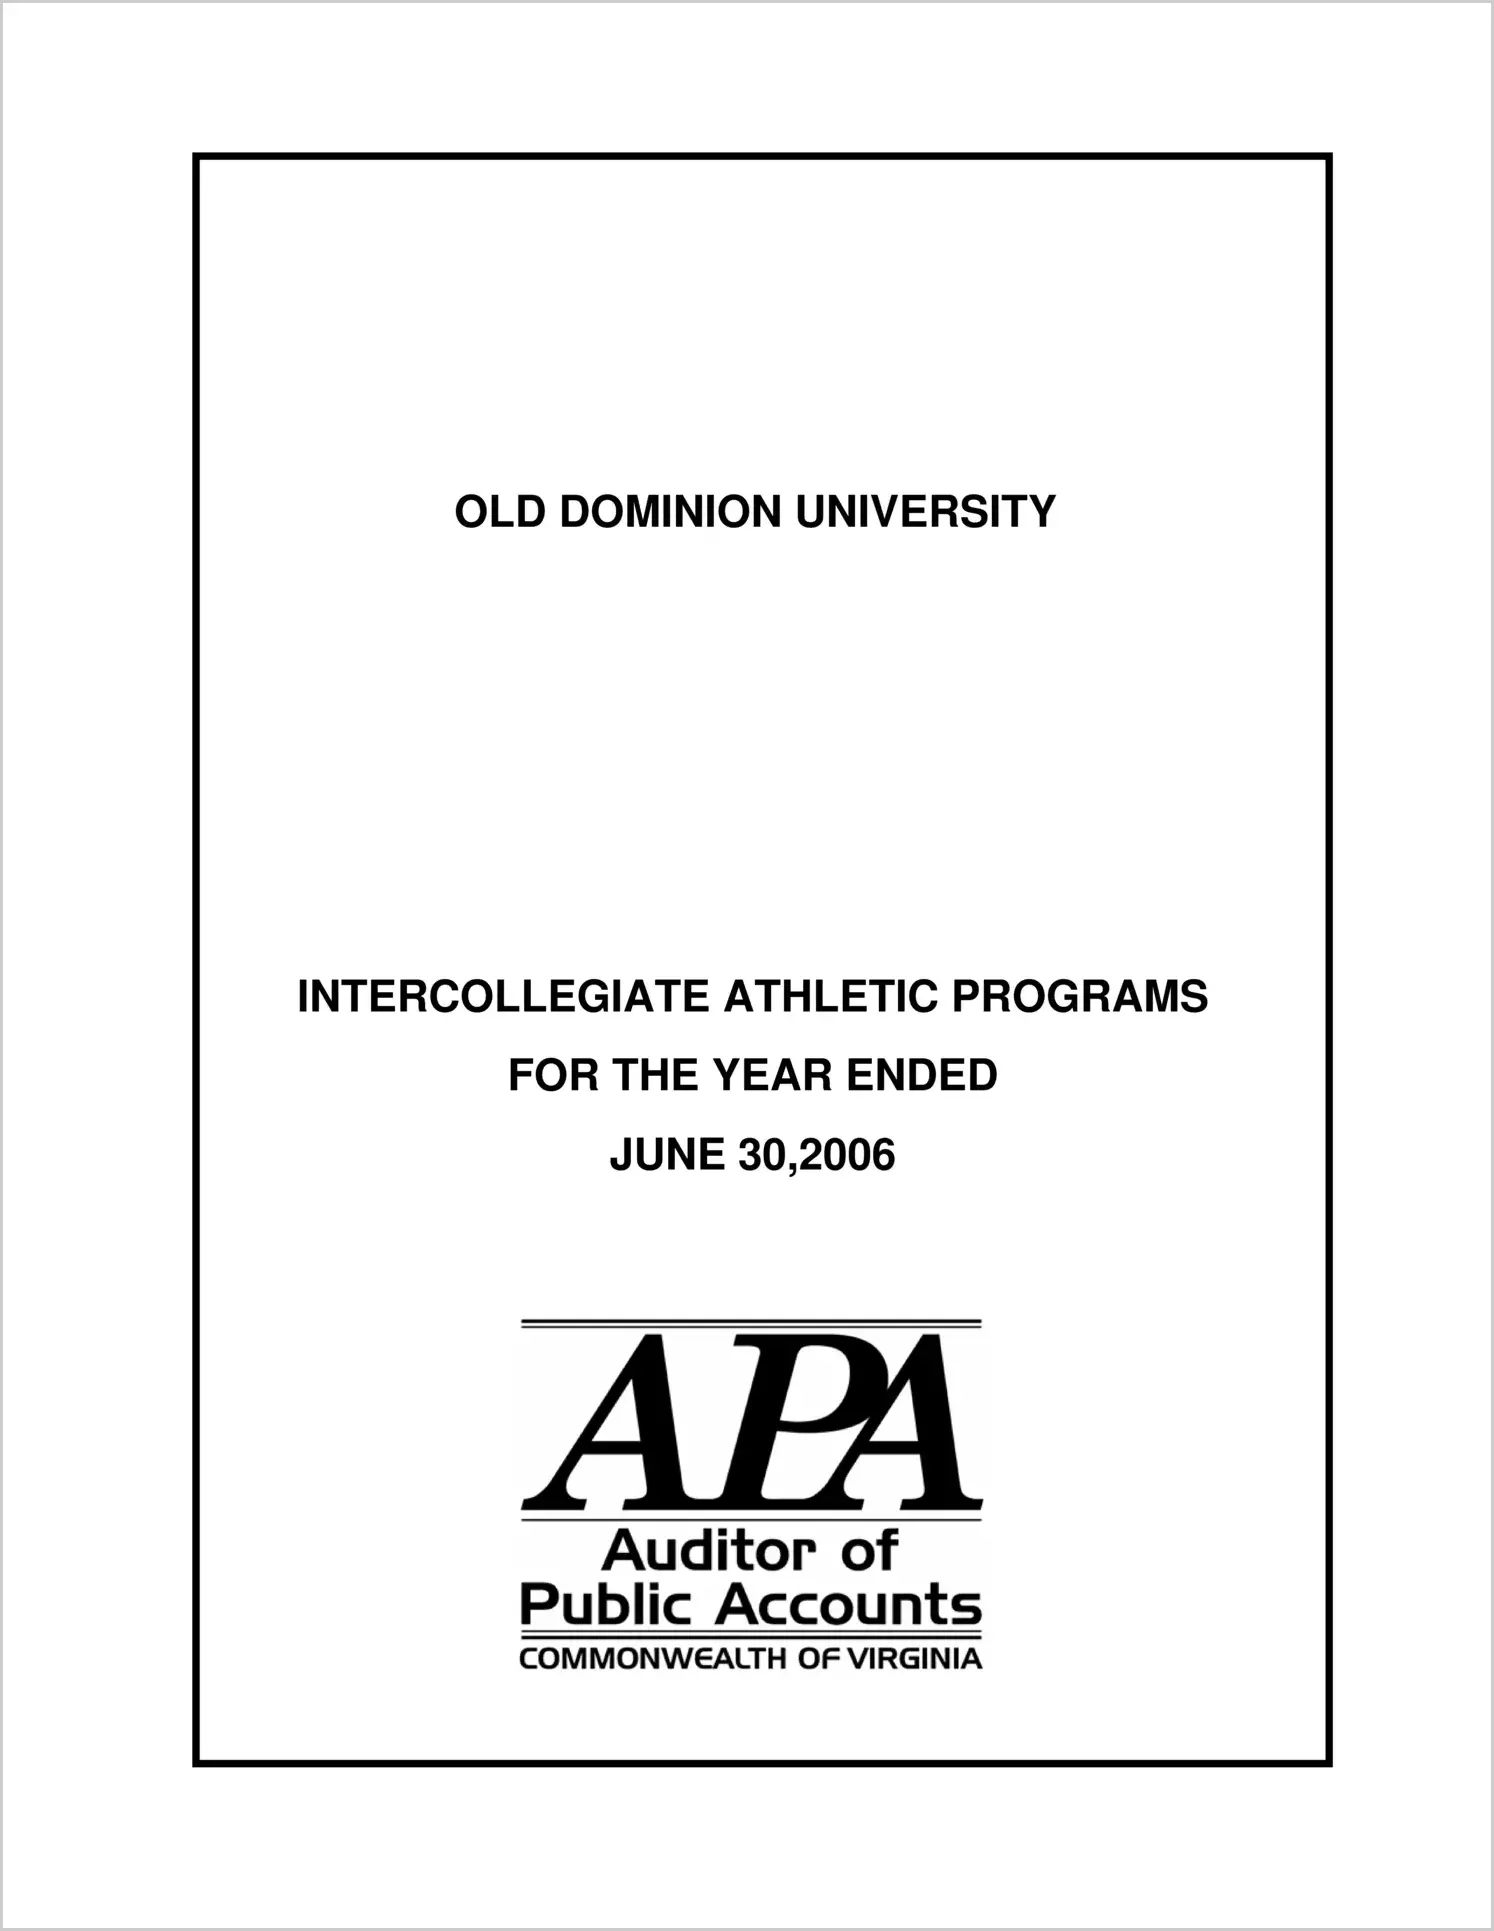 Old Dominion University Intercollegiate Athletic Programs for the year ended June 30, 2006